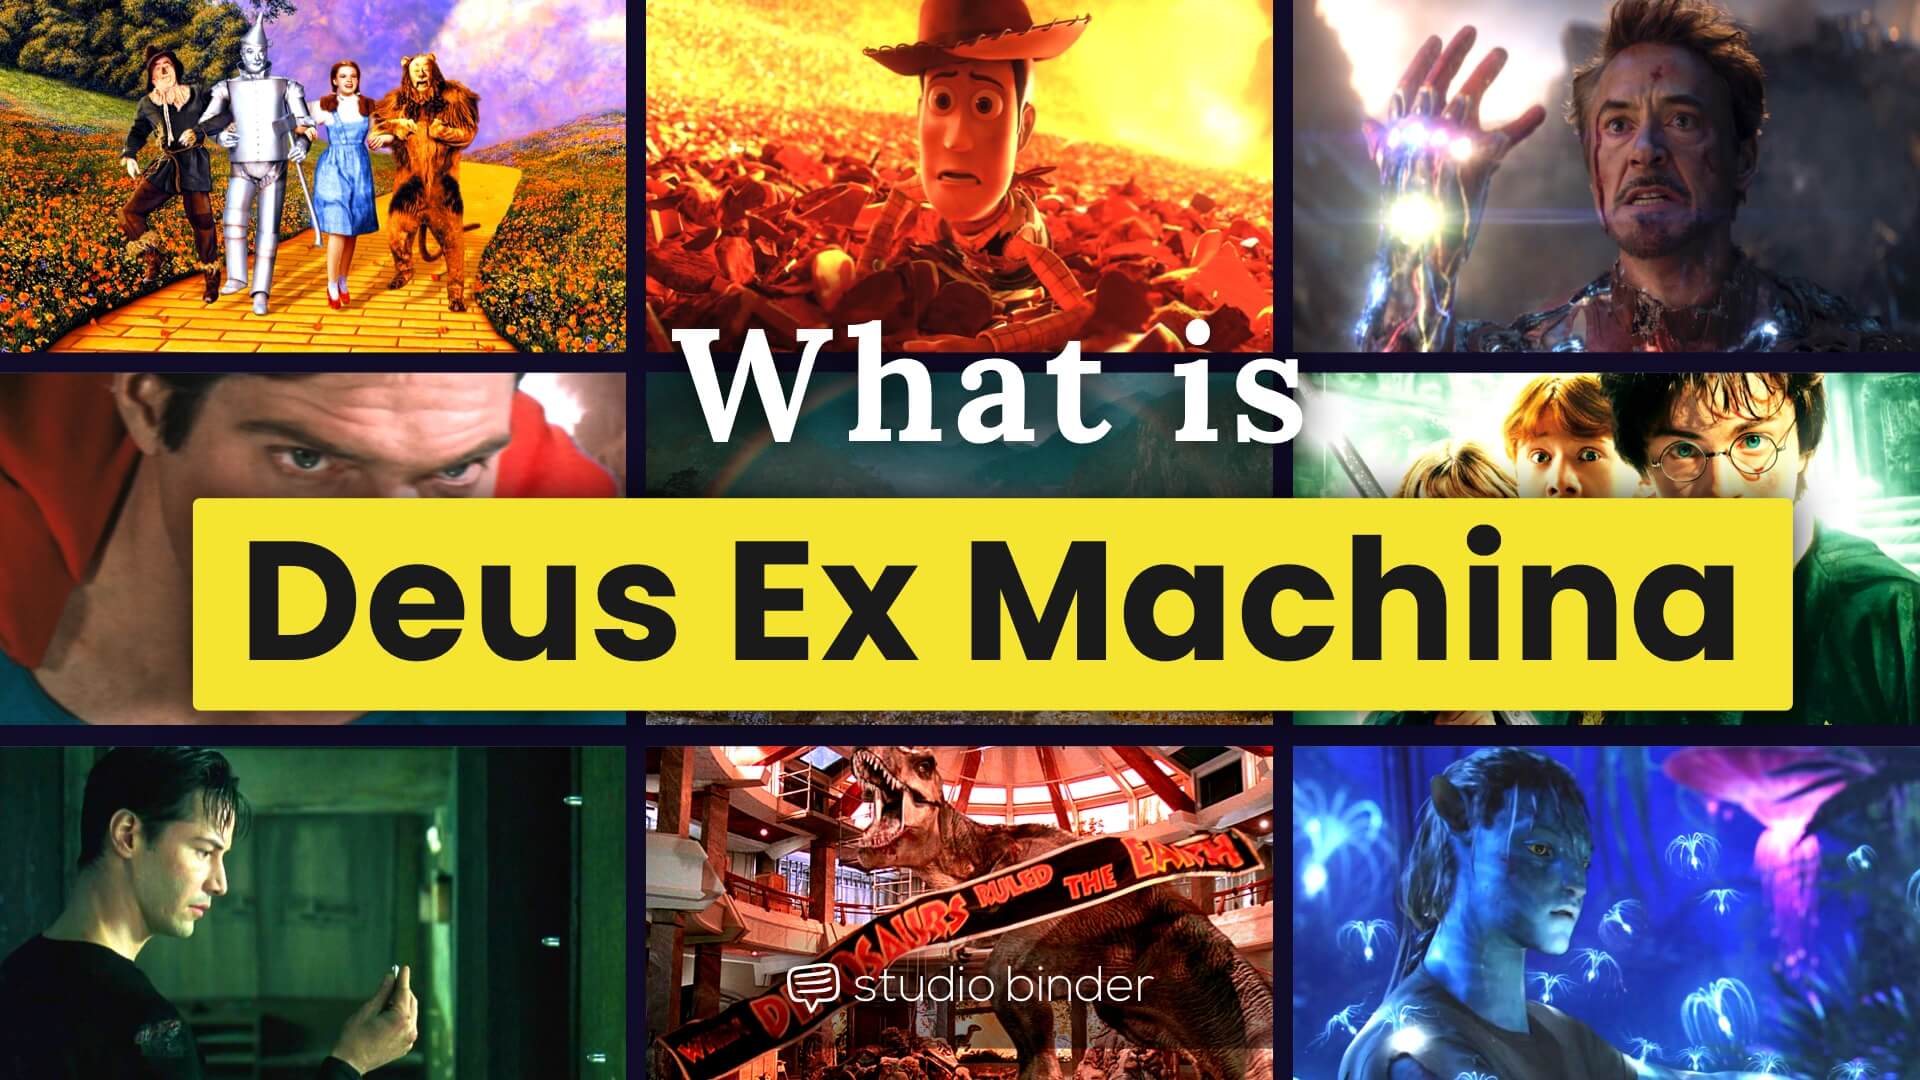 Deus Ex Machina - Consciousness Is Now The God In Our Machine